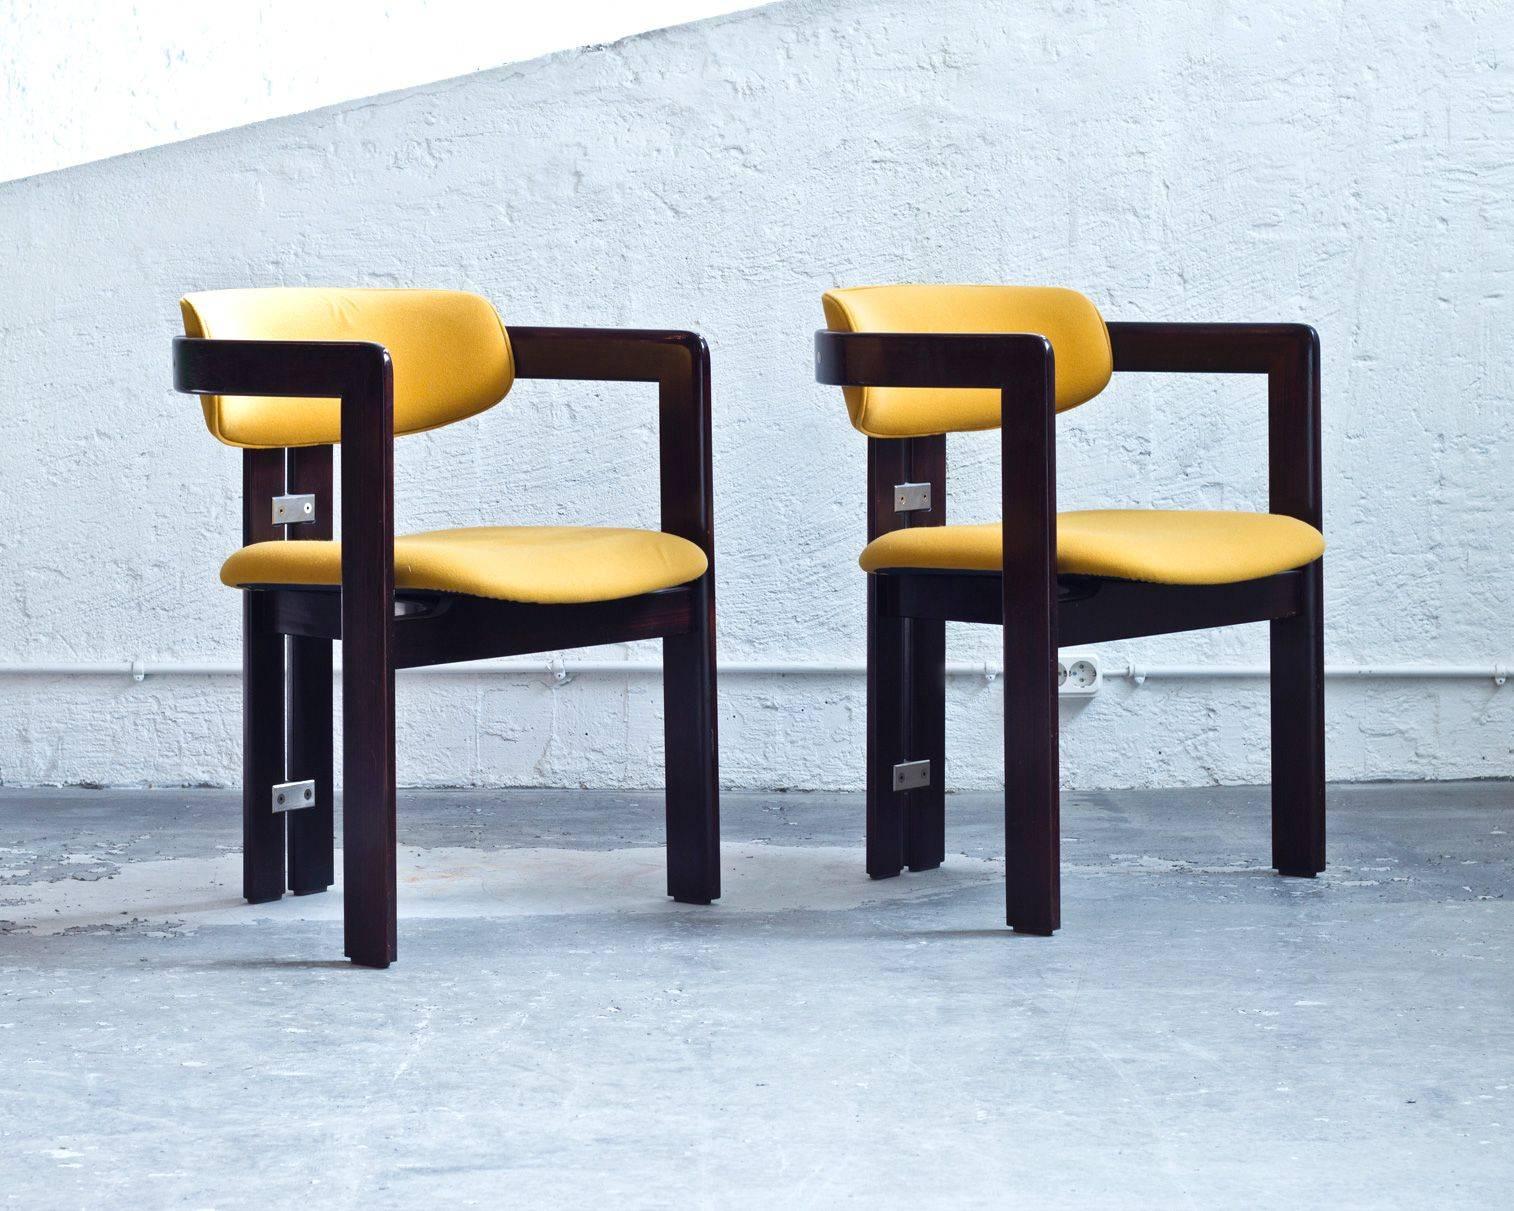 Set of two 'Pamplona' dining chairs in Italian walnut wood, details in stainless steel and upholstered in yellow wool fabric.